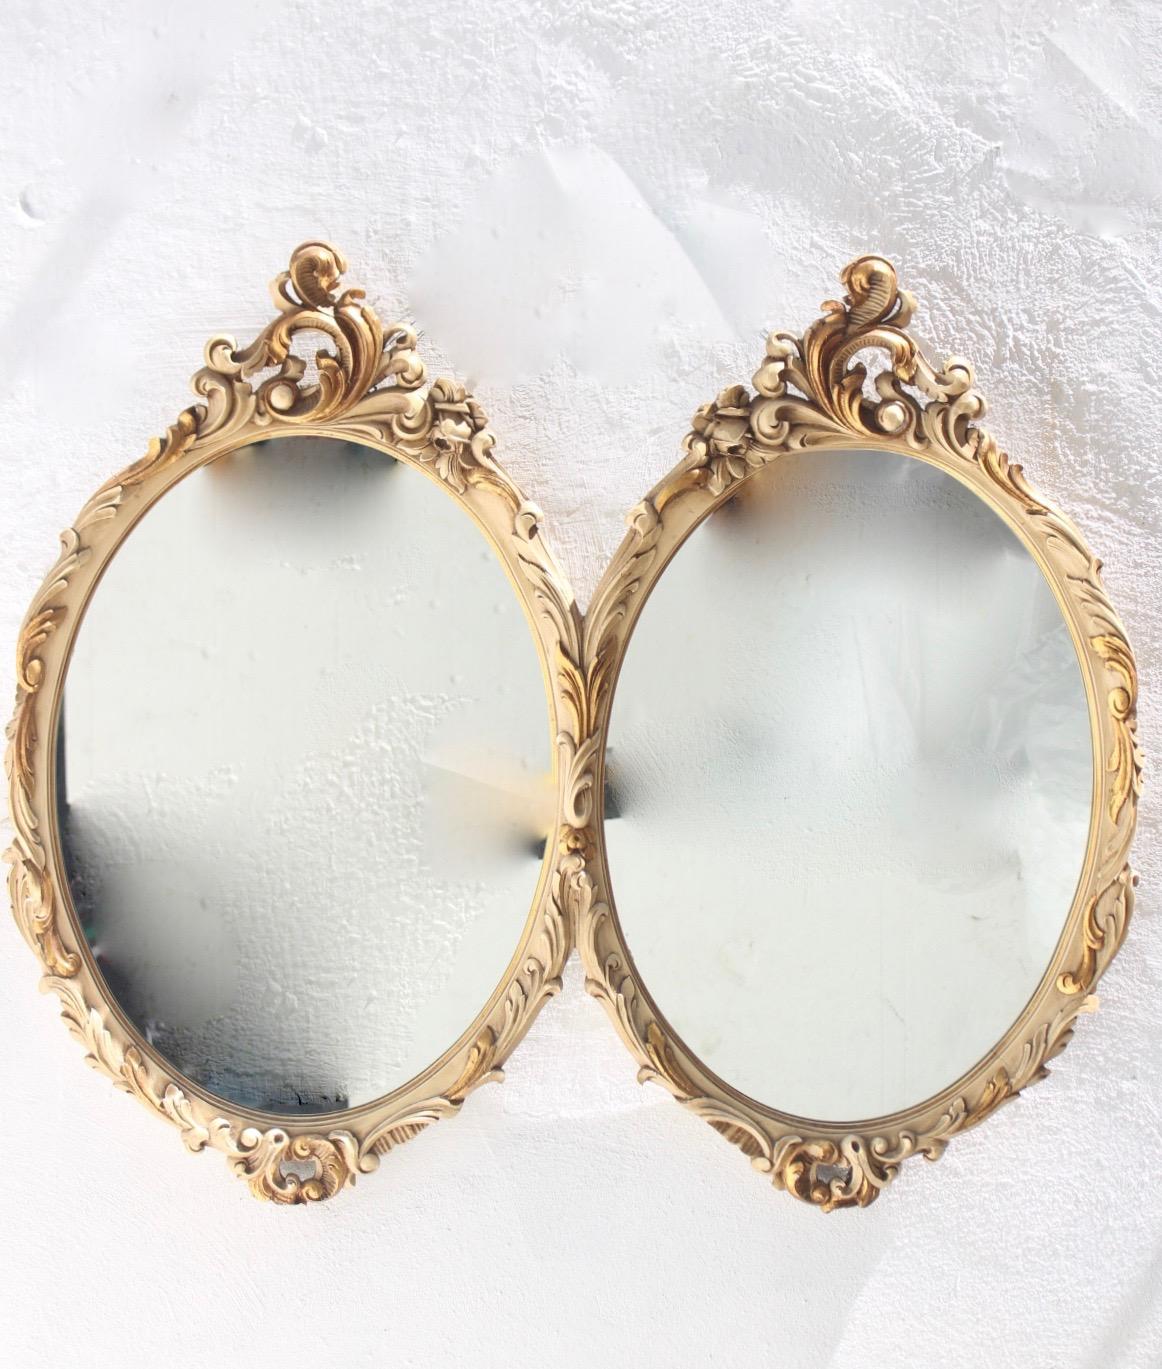 Neoclassical Revival Double Oval White Wood Mirror by Mariano García, 1960s For Sale 7